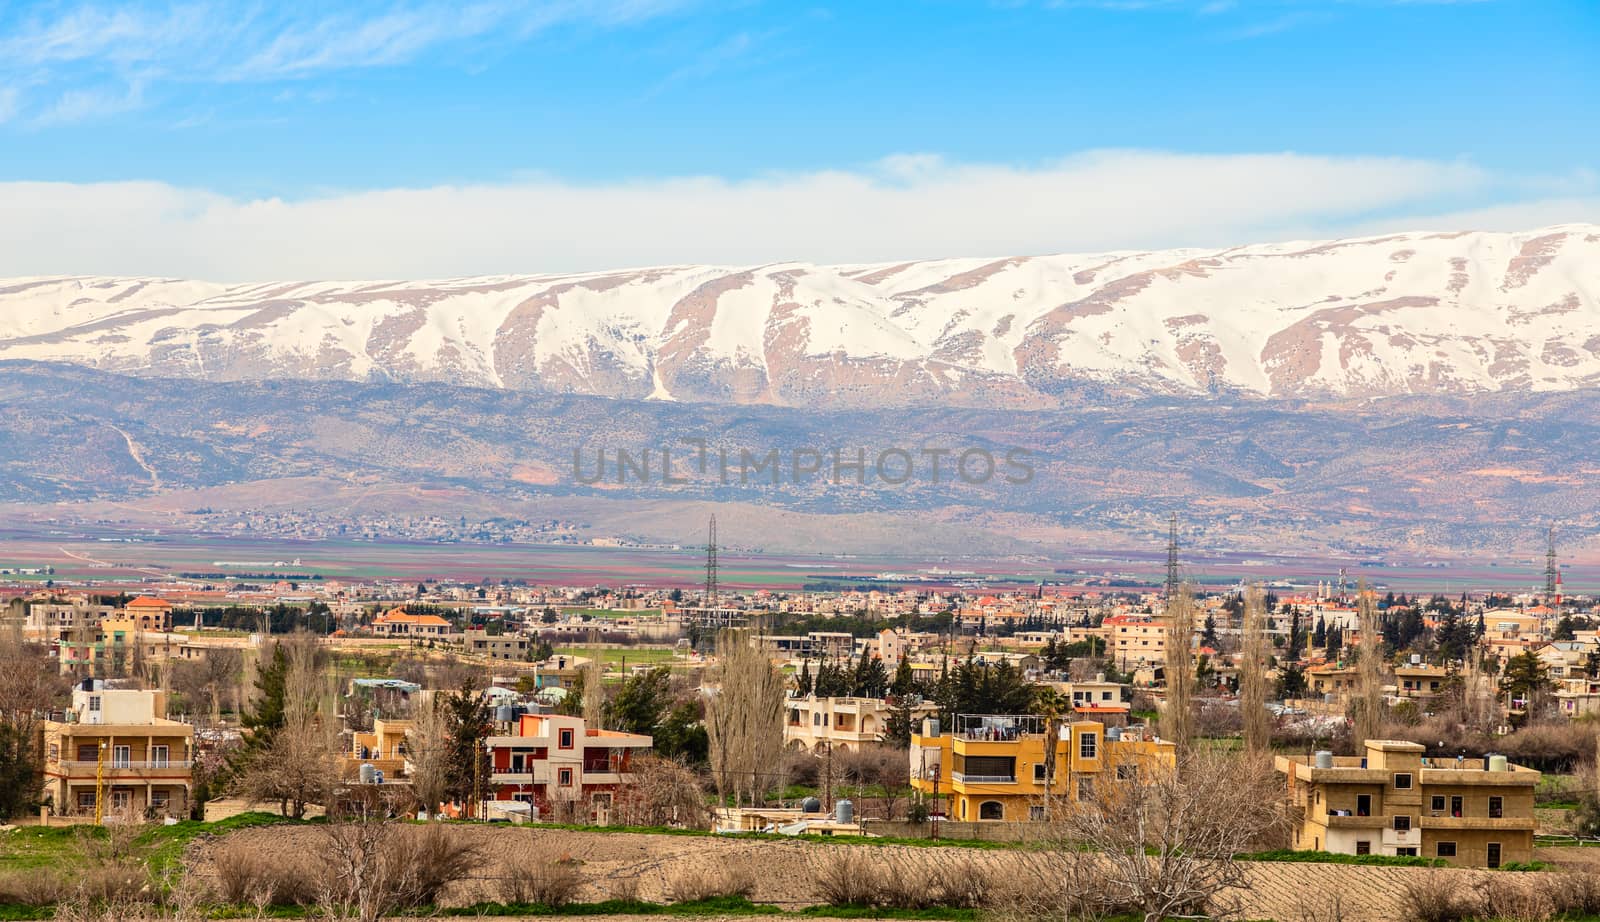 Lebanese houses in Beqaa Valley with snow cap mountains in the b by ambeon